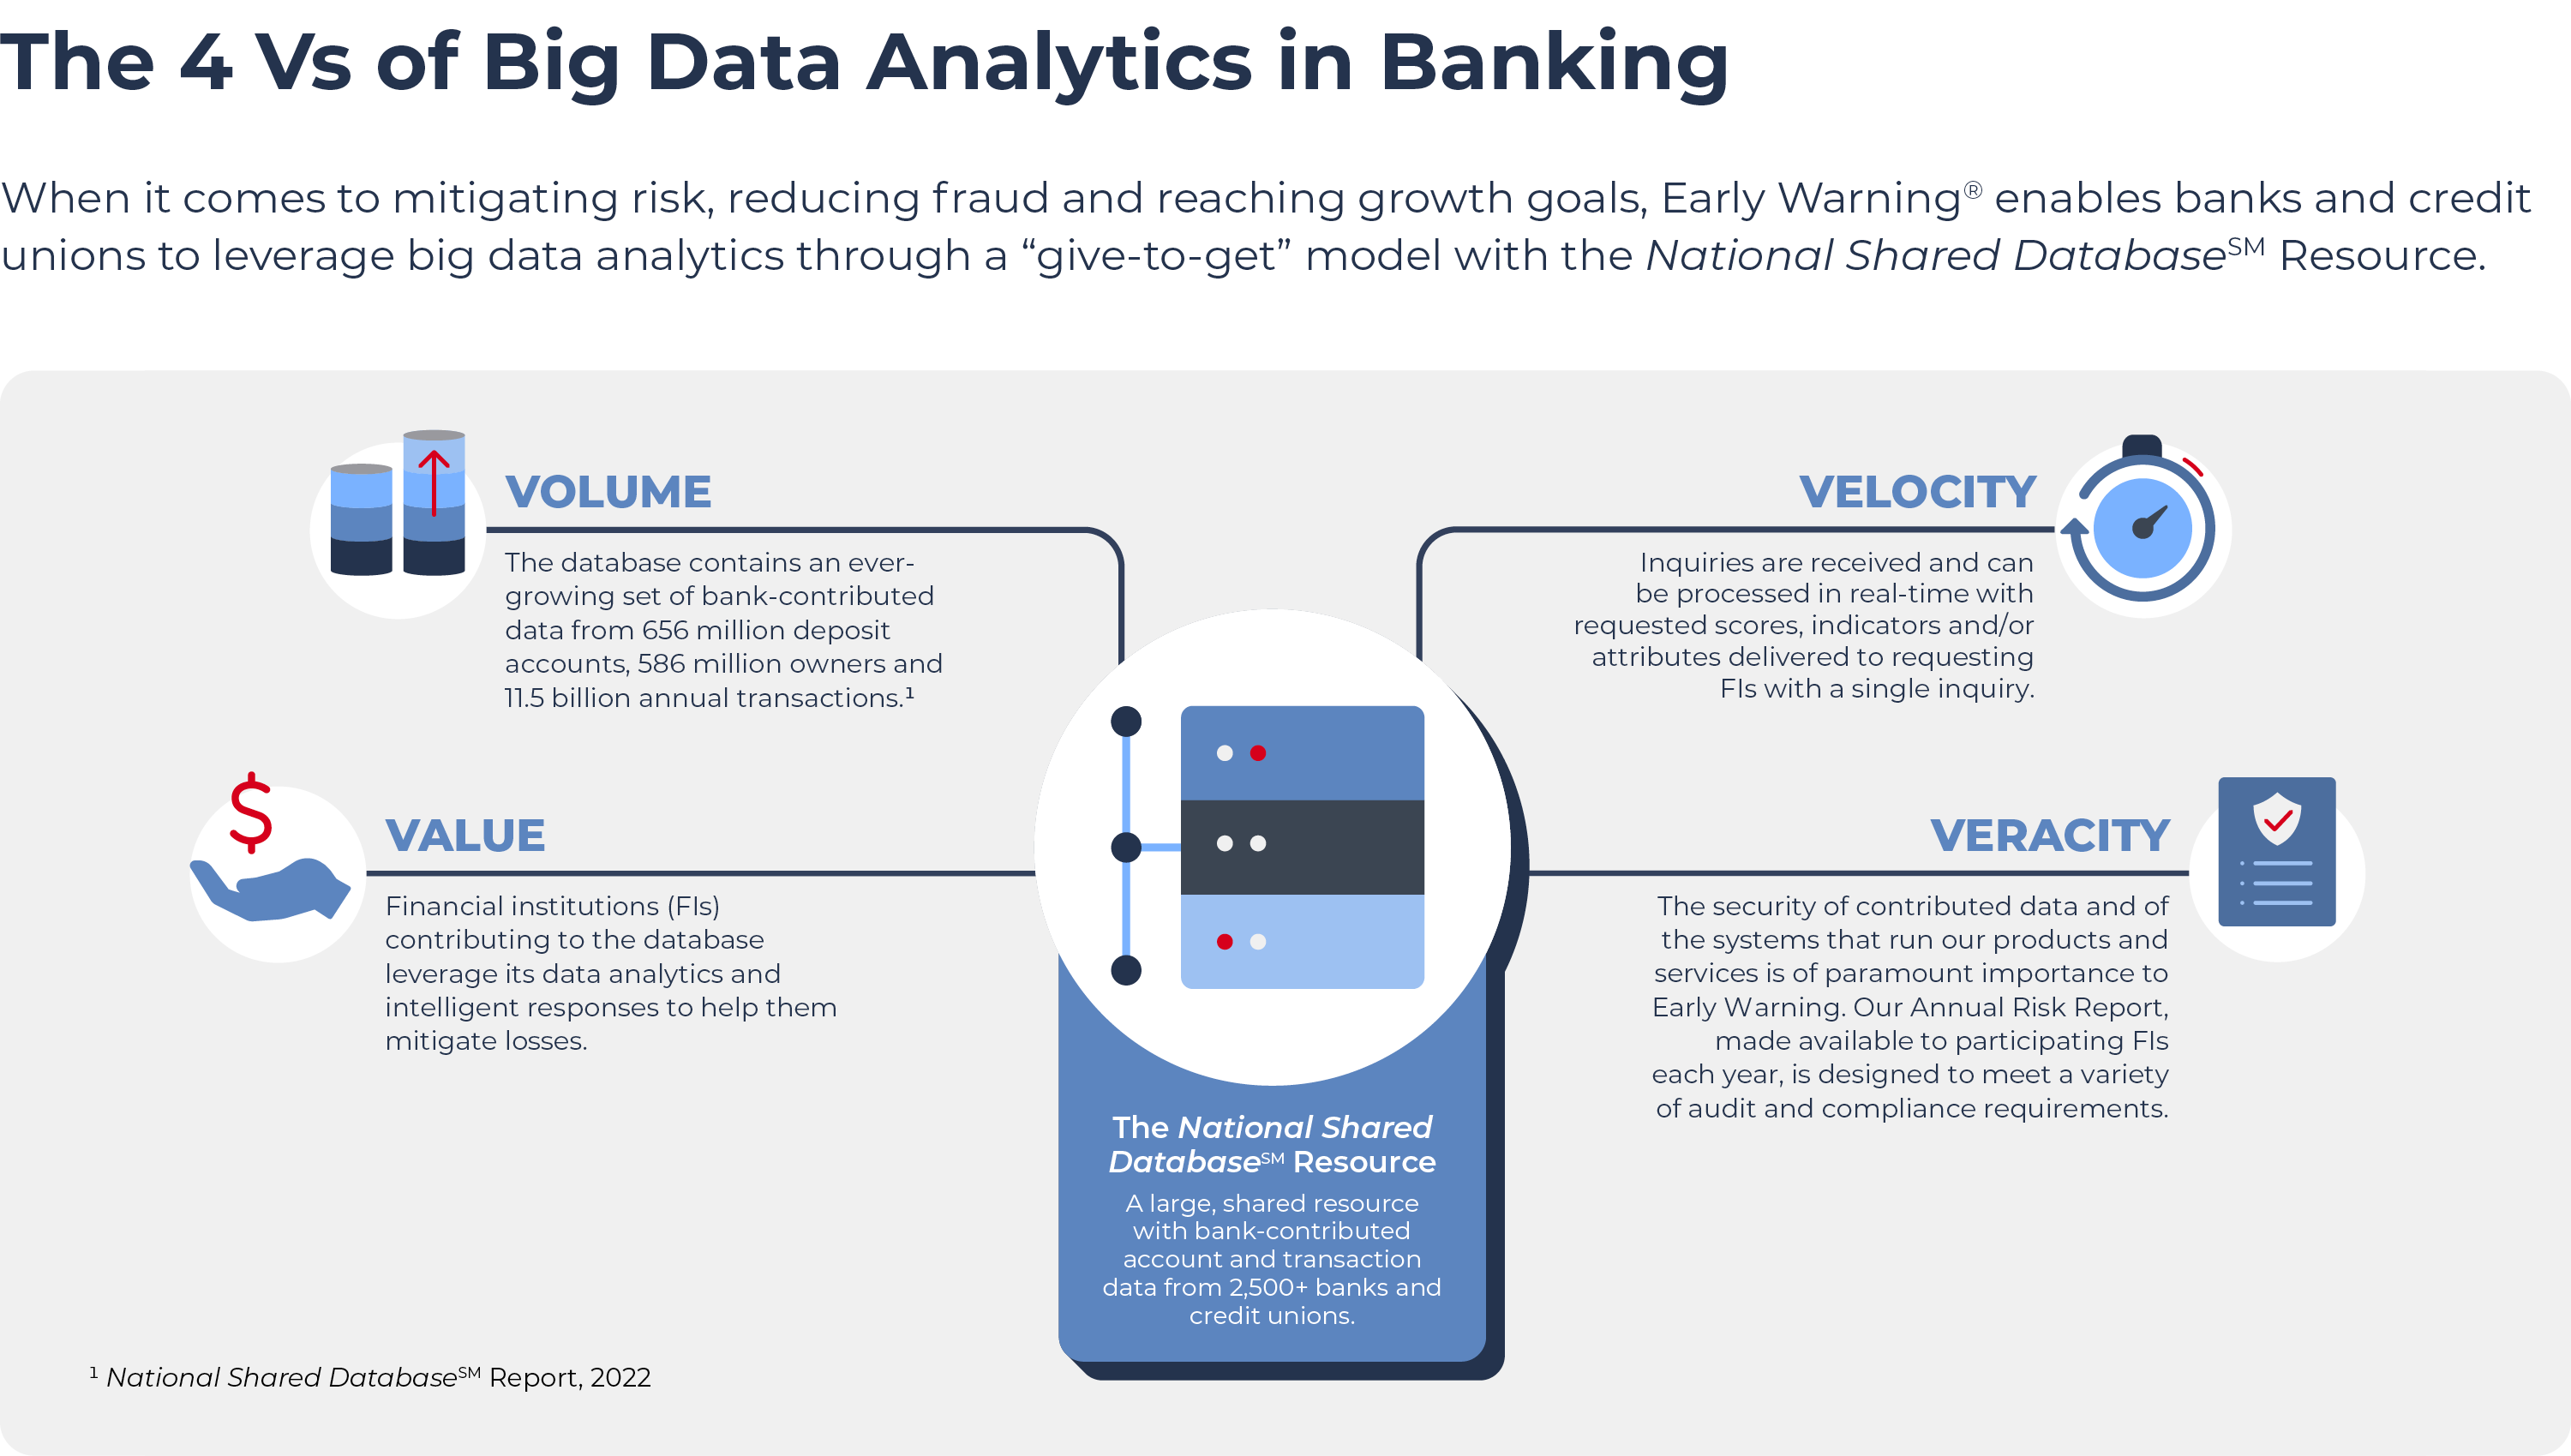 An infographic with icons in blue tones and red accents showcases Early Warning’s National Shared DatabaseSM resource in the middle with an icon made up of three stacked rectangles with dots it them. The 4 Vs of big data analytics in banking surround it: “Volume” in the top left corner shows two stacked cylinders with the right one being taller ; “Velocity” in the top right corner has a stopwatch icon with an arrow that gives it a sense of motion; “Value” in the bottom left corner shows an outstretched hand